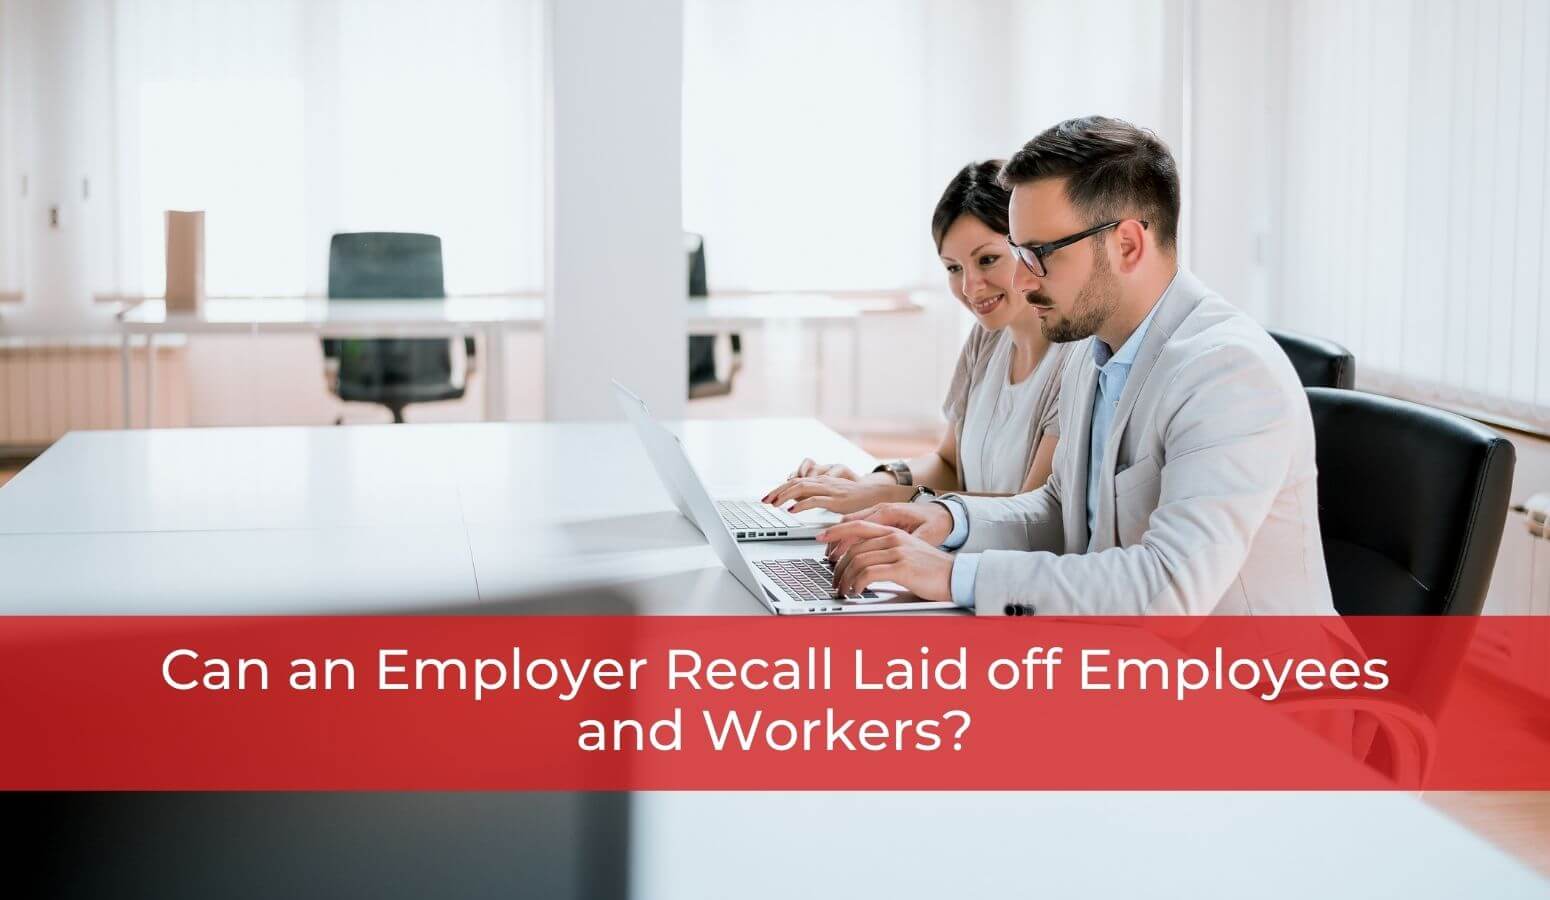 Featured image for “Can an Employer Recall Laid off Employees and Workers?”